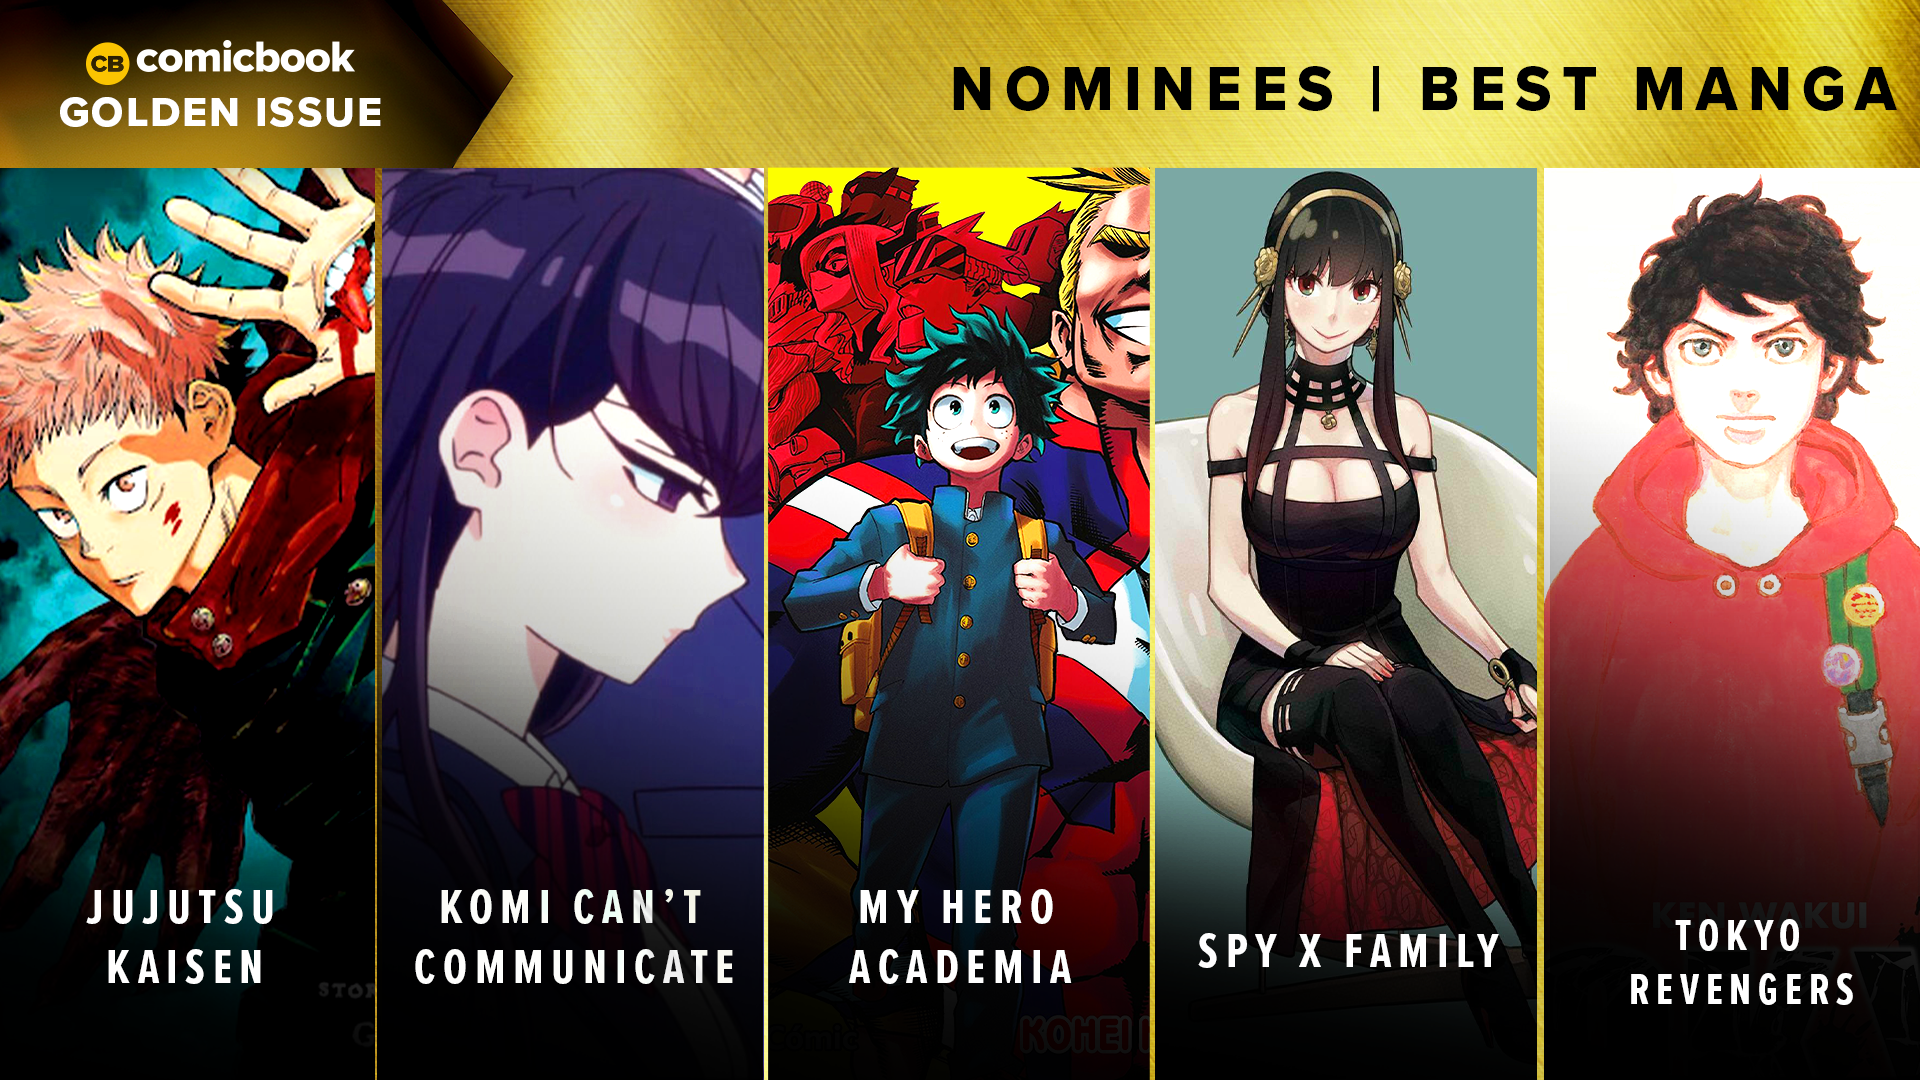 golden-issues-2021-nominees-best-manga.png